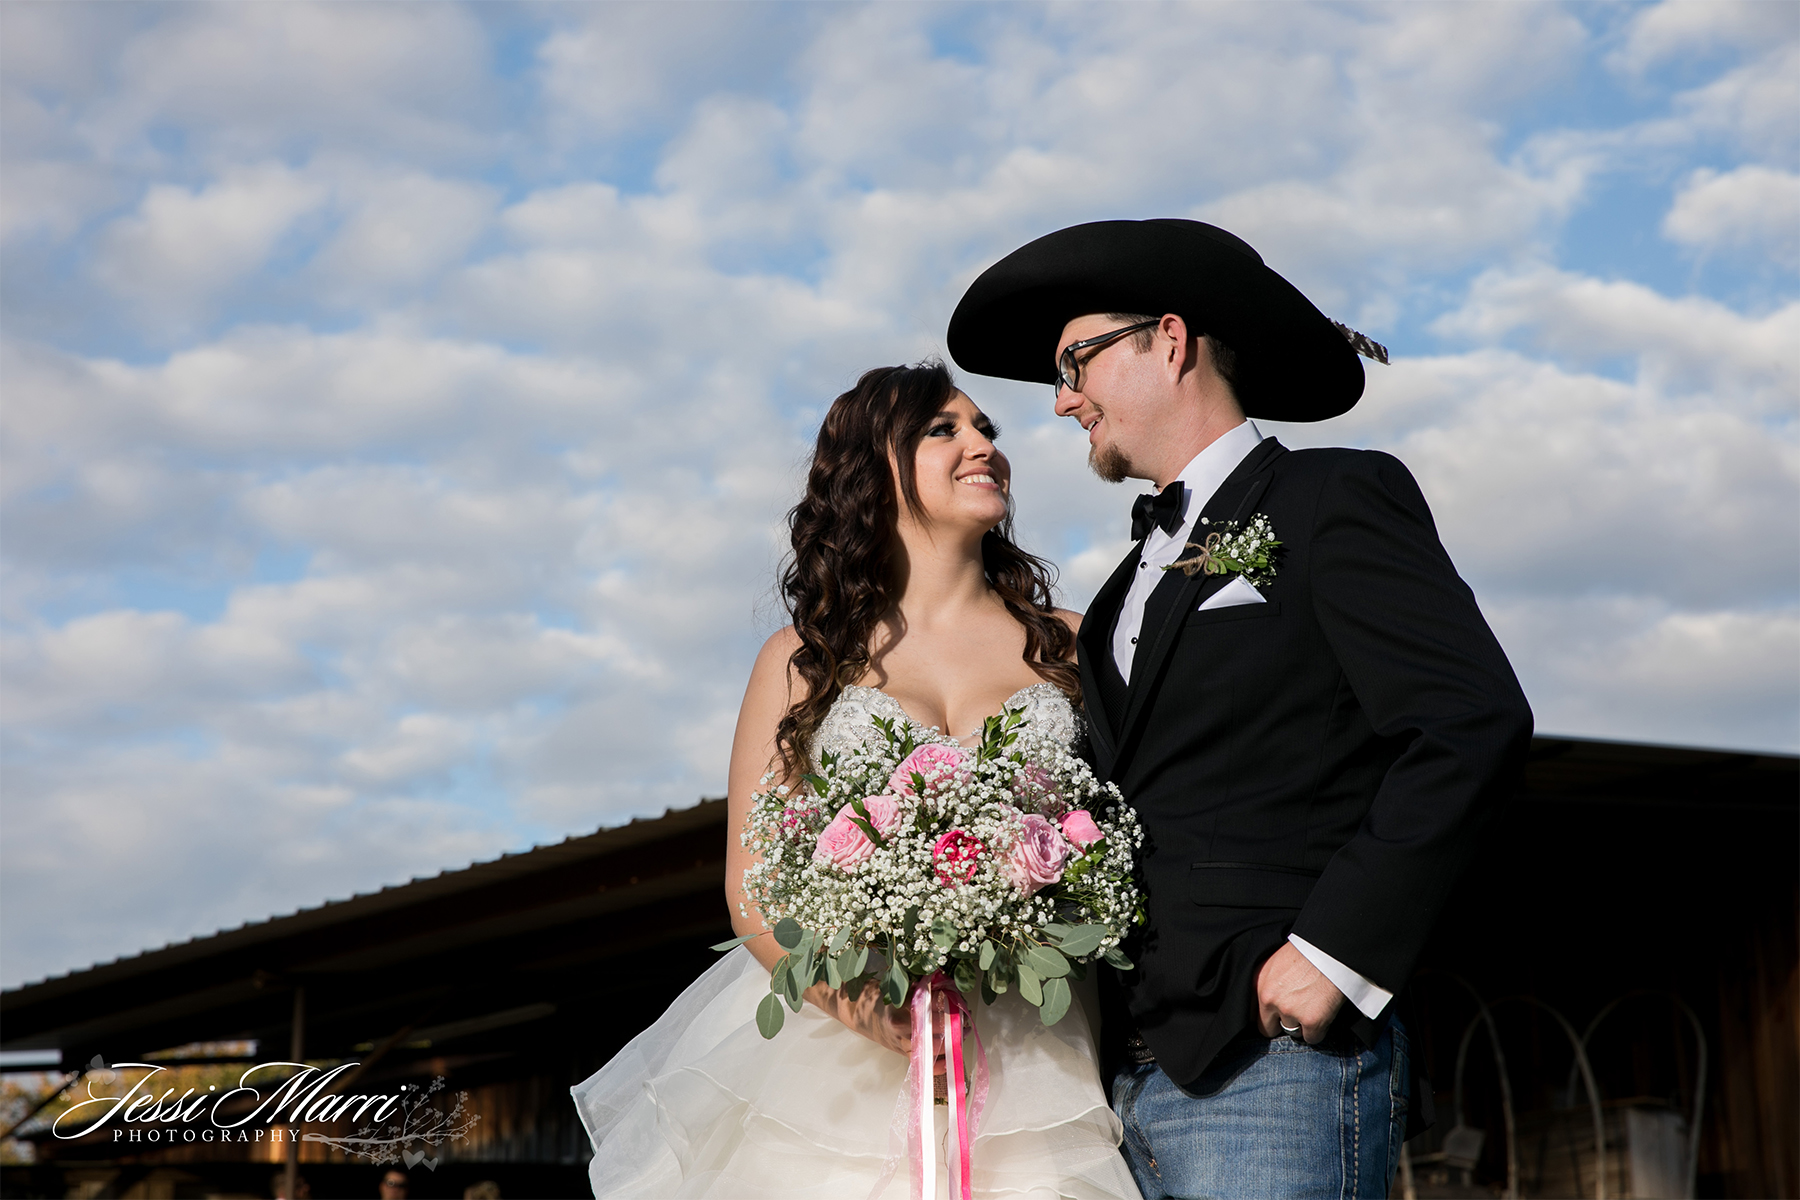 Texas Relay Station Event Center - Jessi Marri Photography